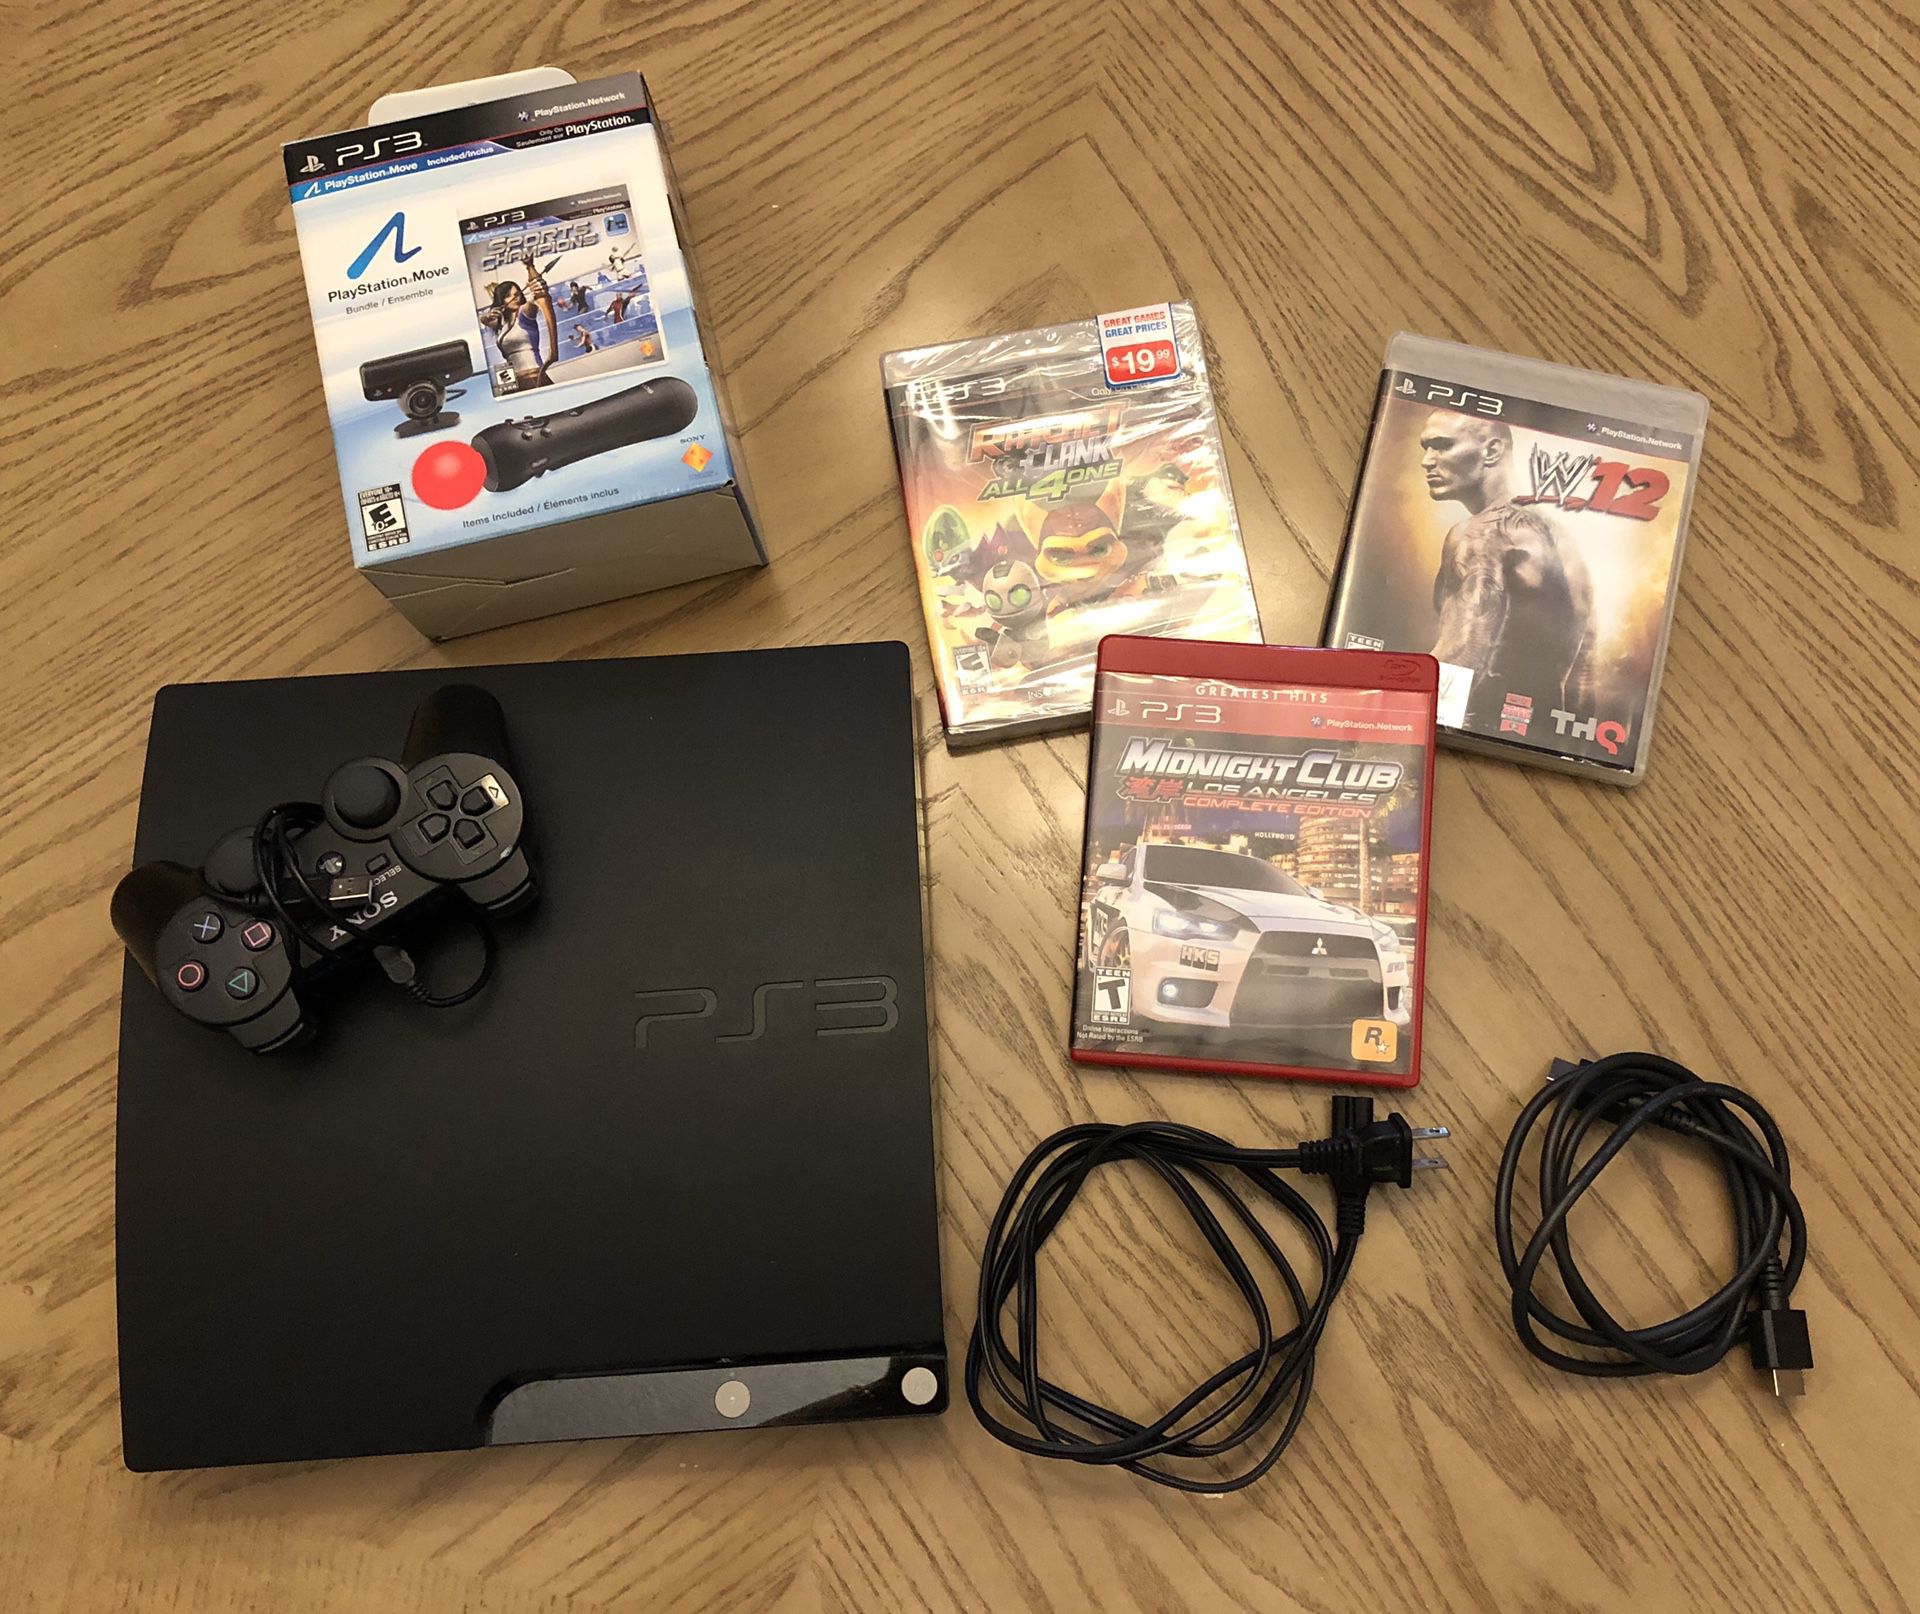 PlayStation 3 (PS 3 120 GB) with games and move bundle